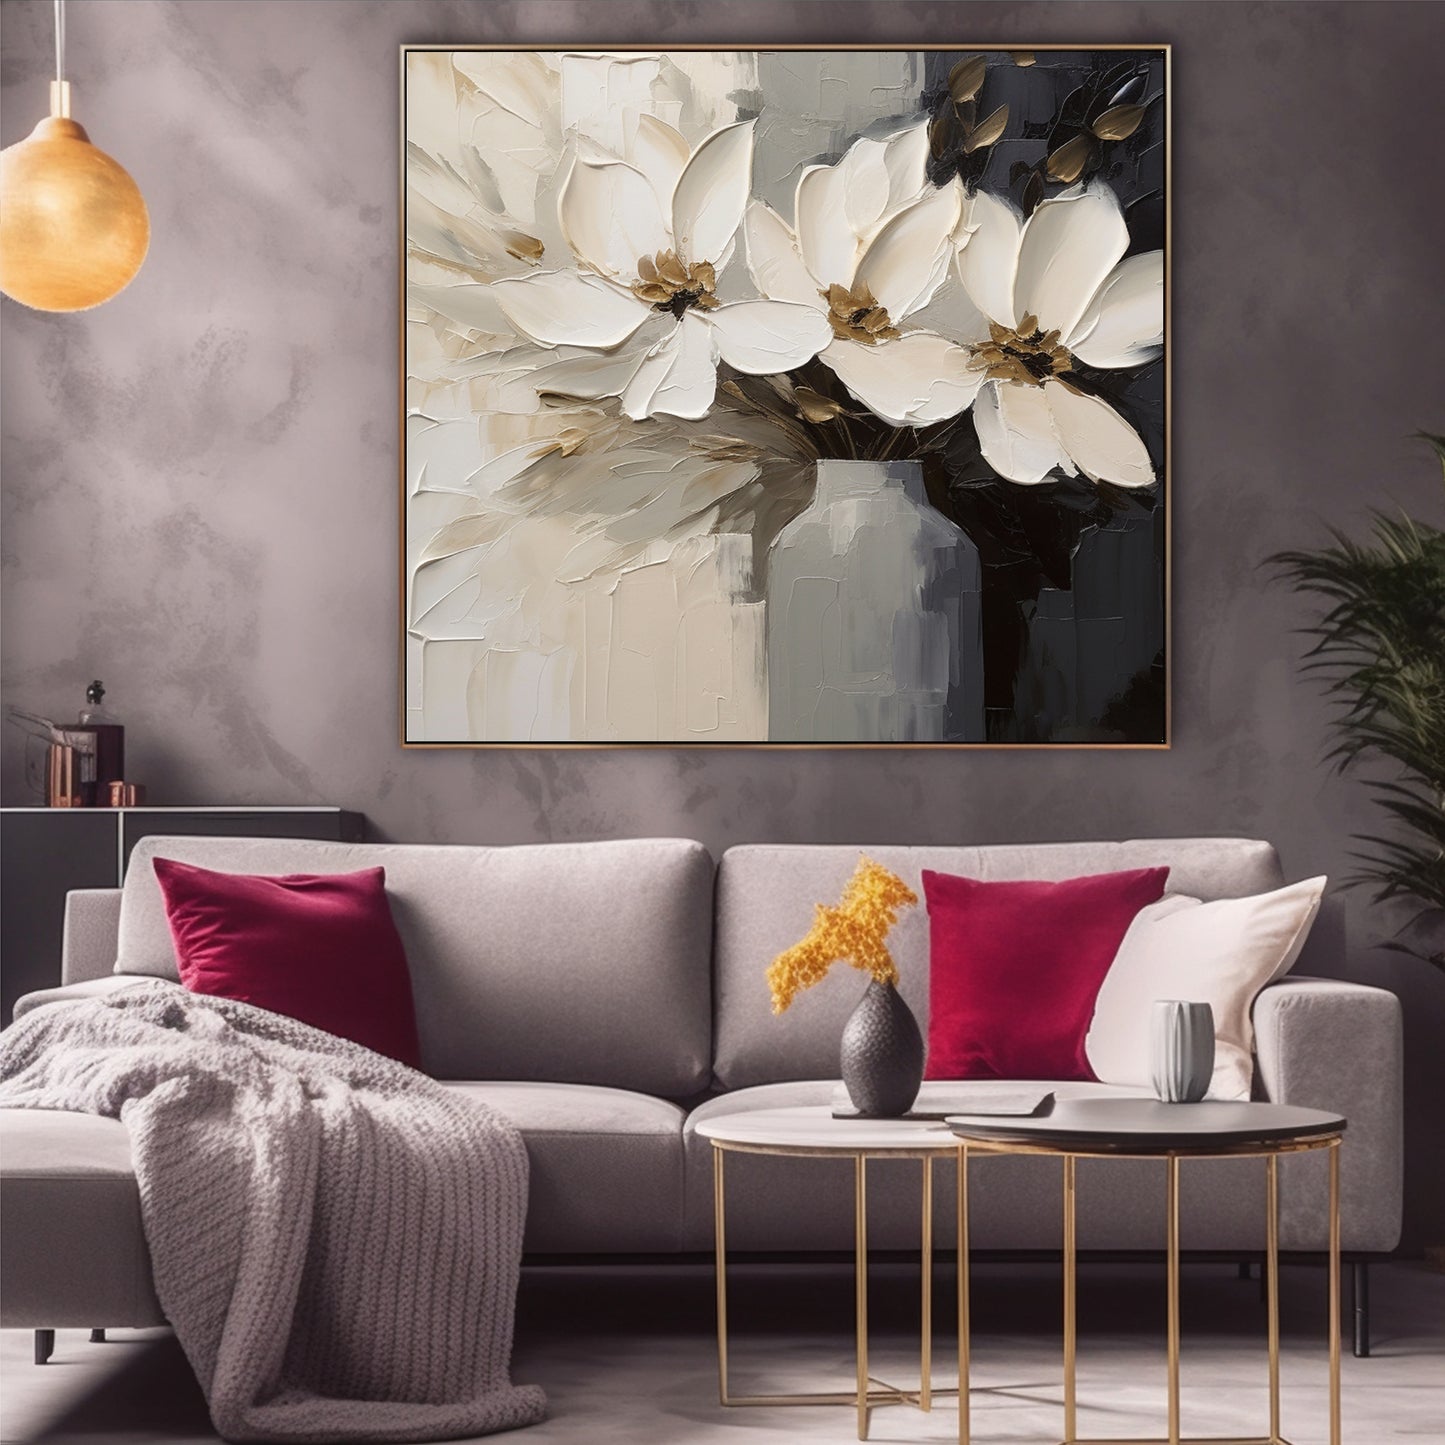 Texture Wall Decor Home Decor Gift Abstract Floral Painting F#BRT2328